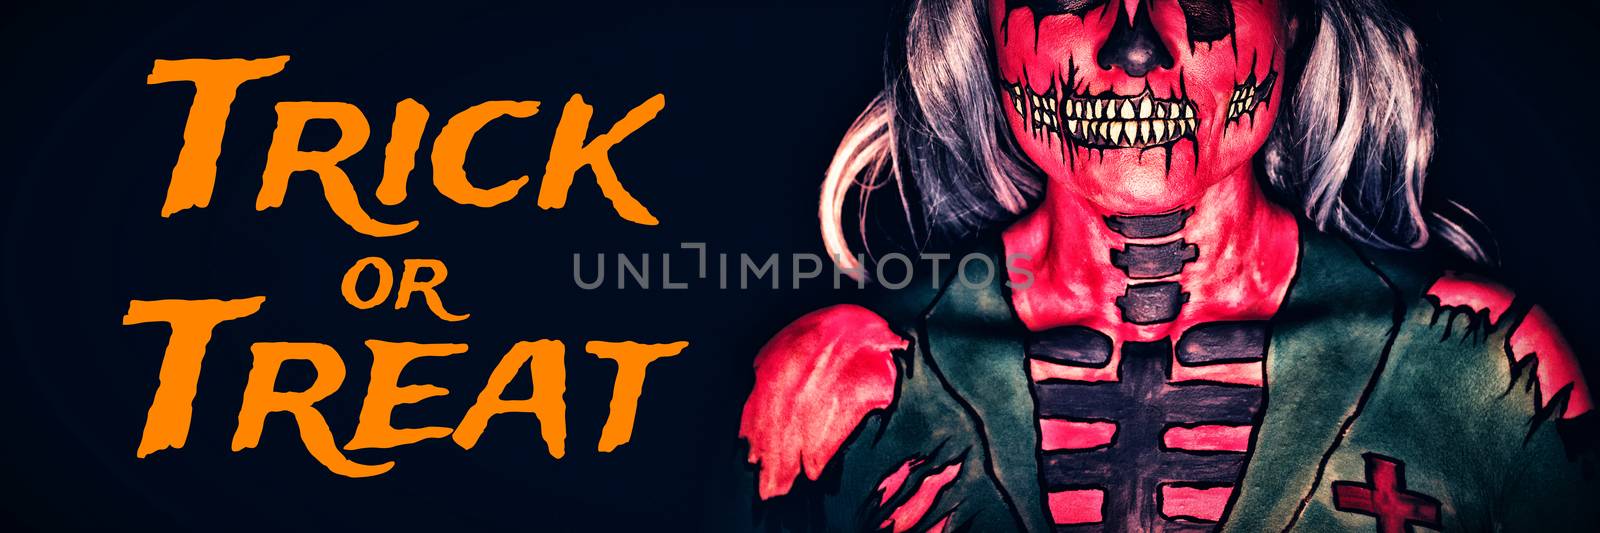 Composite image of graphic image of trick or treat text by Wavebreakmedia